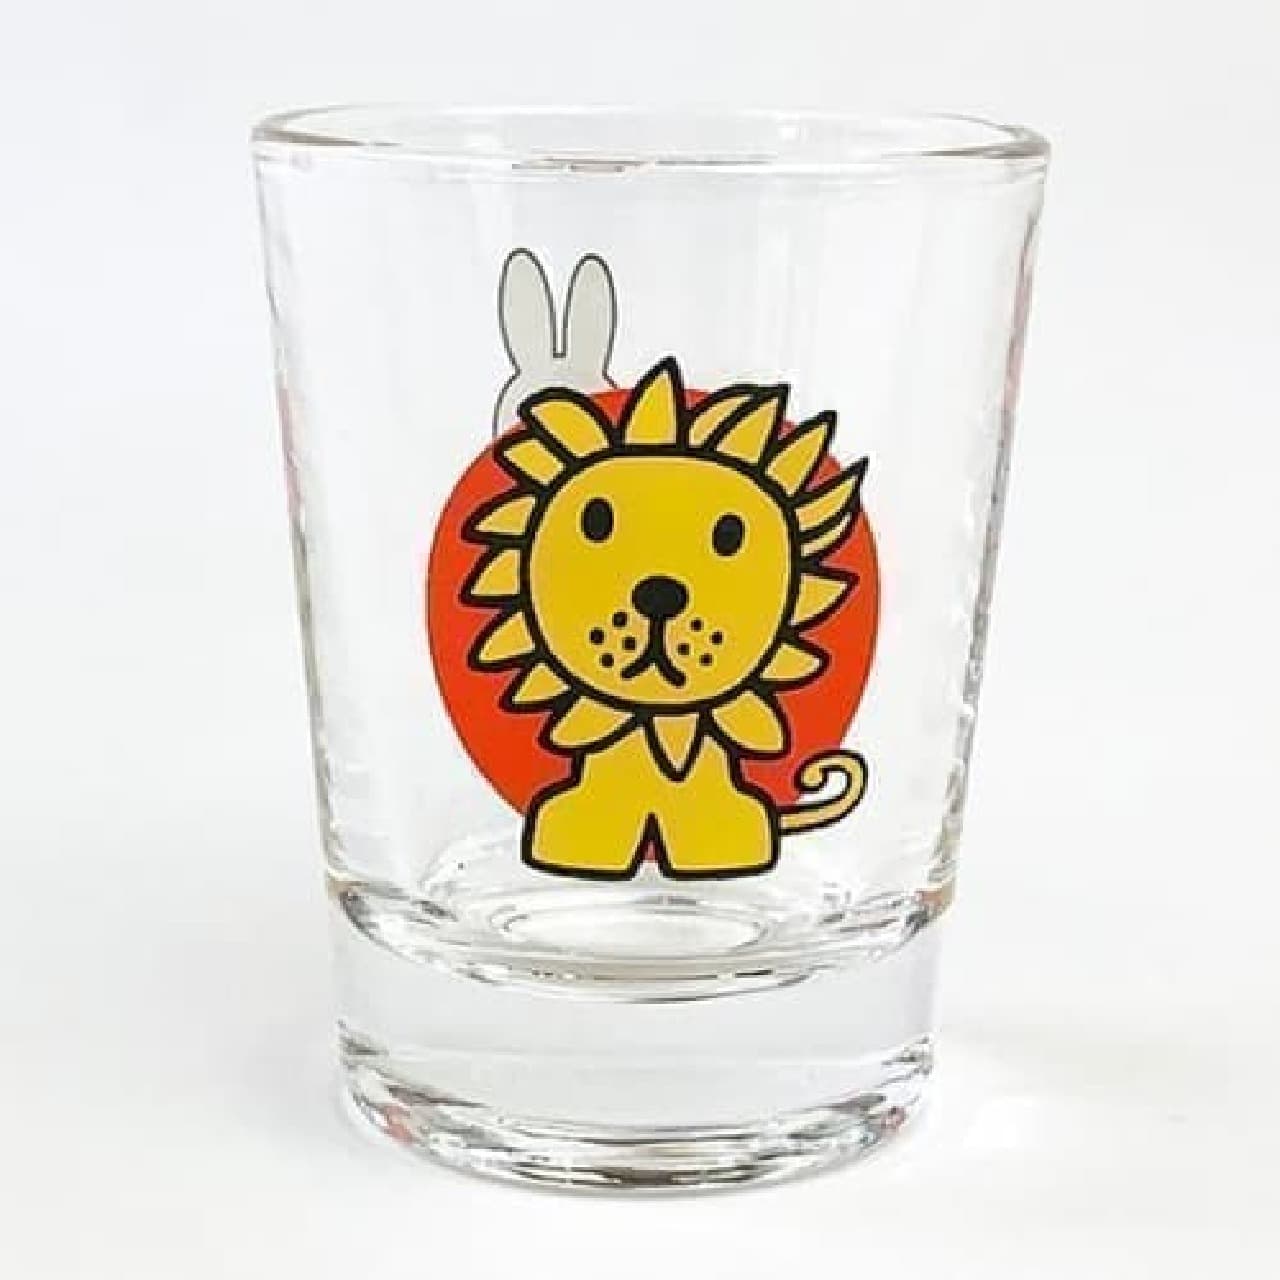 Shot glass designed by Miffy